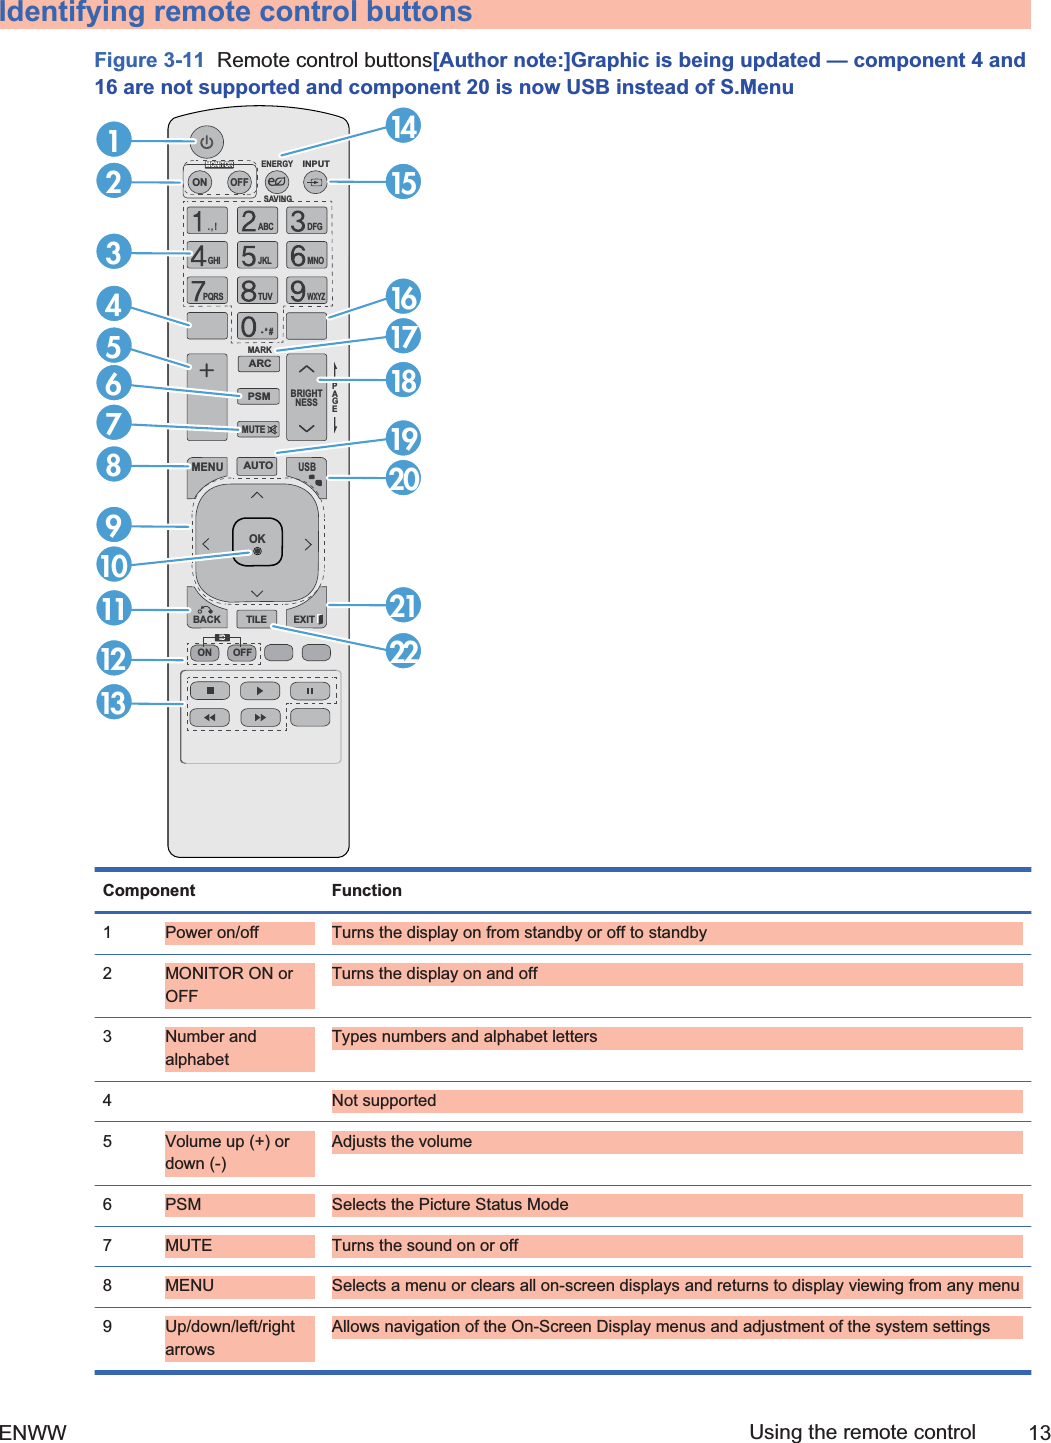 Identifying remote control buttonsFigure 3-11  Remote control buttons[Author note:]Graphic is being updated — component 4 and16 are not supported and component 20 is now USB instead of S.MenuPAGEINPUTENERGYSAVINGMARKARCONOFF. , ! ABC DFGGHI JKL MNOPQRS TUV- * #WXYZOKUSBMONITORPSMAUTOMUTEBRIGHTNESSMENUIDBACK TILEON OFFEXIT12381112139106745141518202122161719Component Function1Power on/off Turns the display on from standby or off to standby2MONITOR ON orOFFTurns the display on and off3Number andalphabetTypes numbers and alphabet letters4  Not supported5Volume up (+) ordown (-)Adjusts the volume6PSM Selects the Picture Status Mode7MUTE Turns the sound on or off8MENU Selects a menu or clears all on-screen displays and returns to display viewing from any menu9Up/down/left/rightarrowsAllows navigation of the On-Screen Display menus and adjustment of the system settingsENWW Using the remote control 132ndDraft